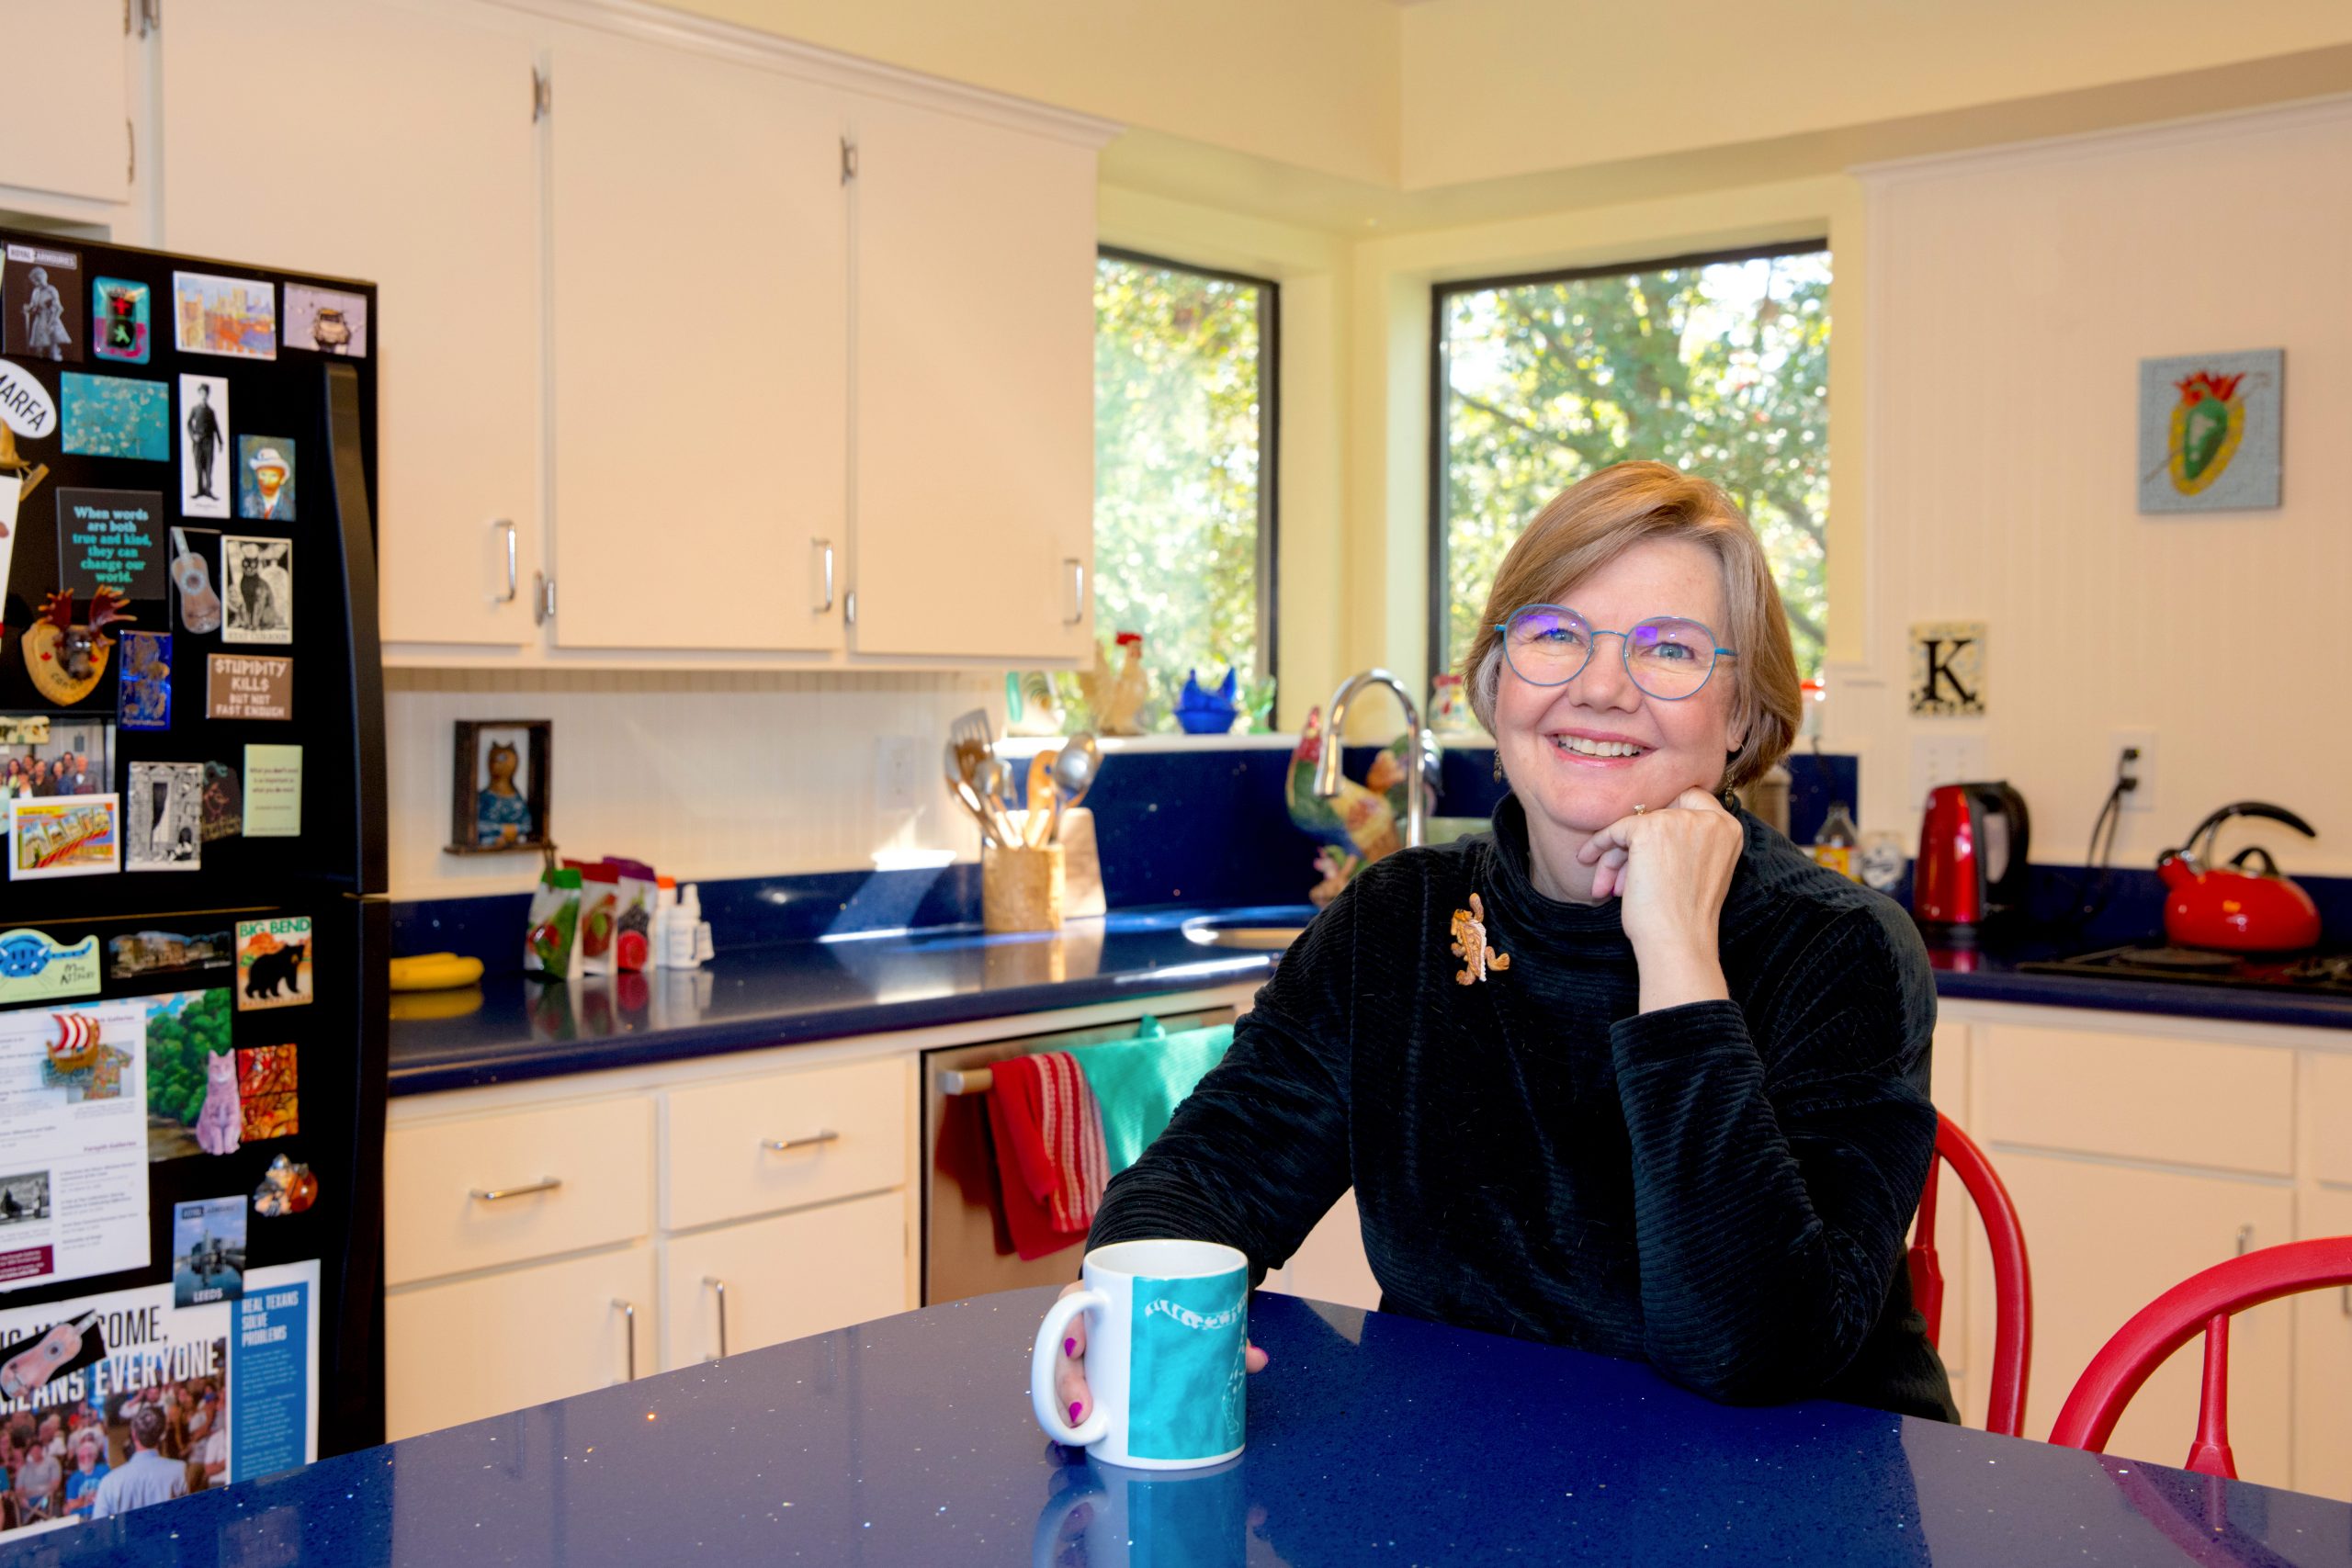 Kathi Appelt in the heart of her home, her kitchen.